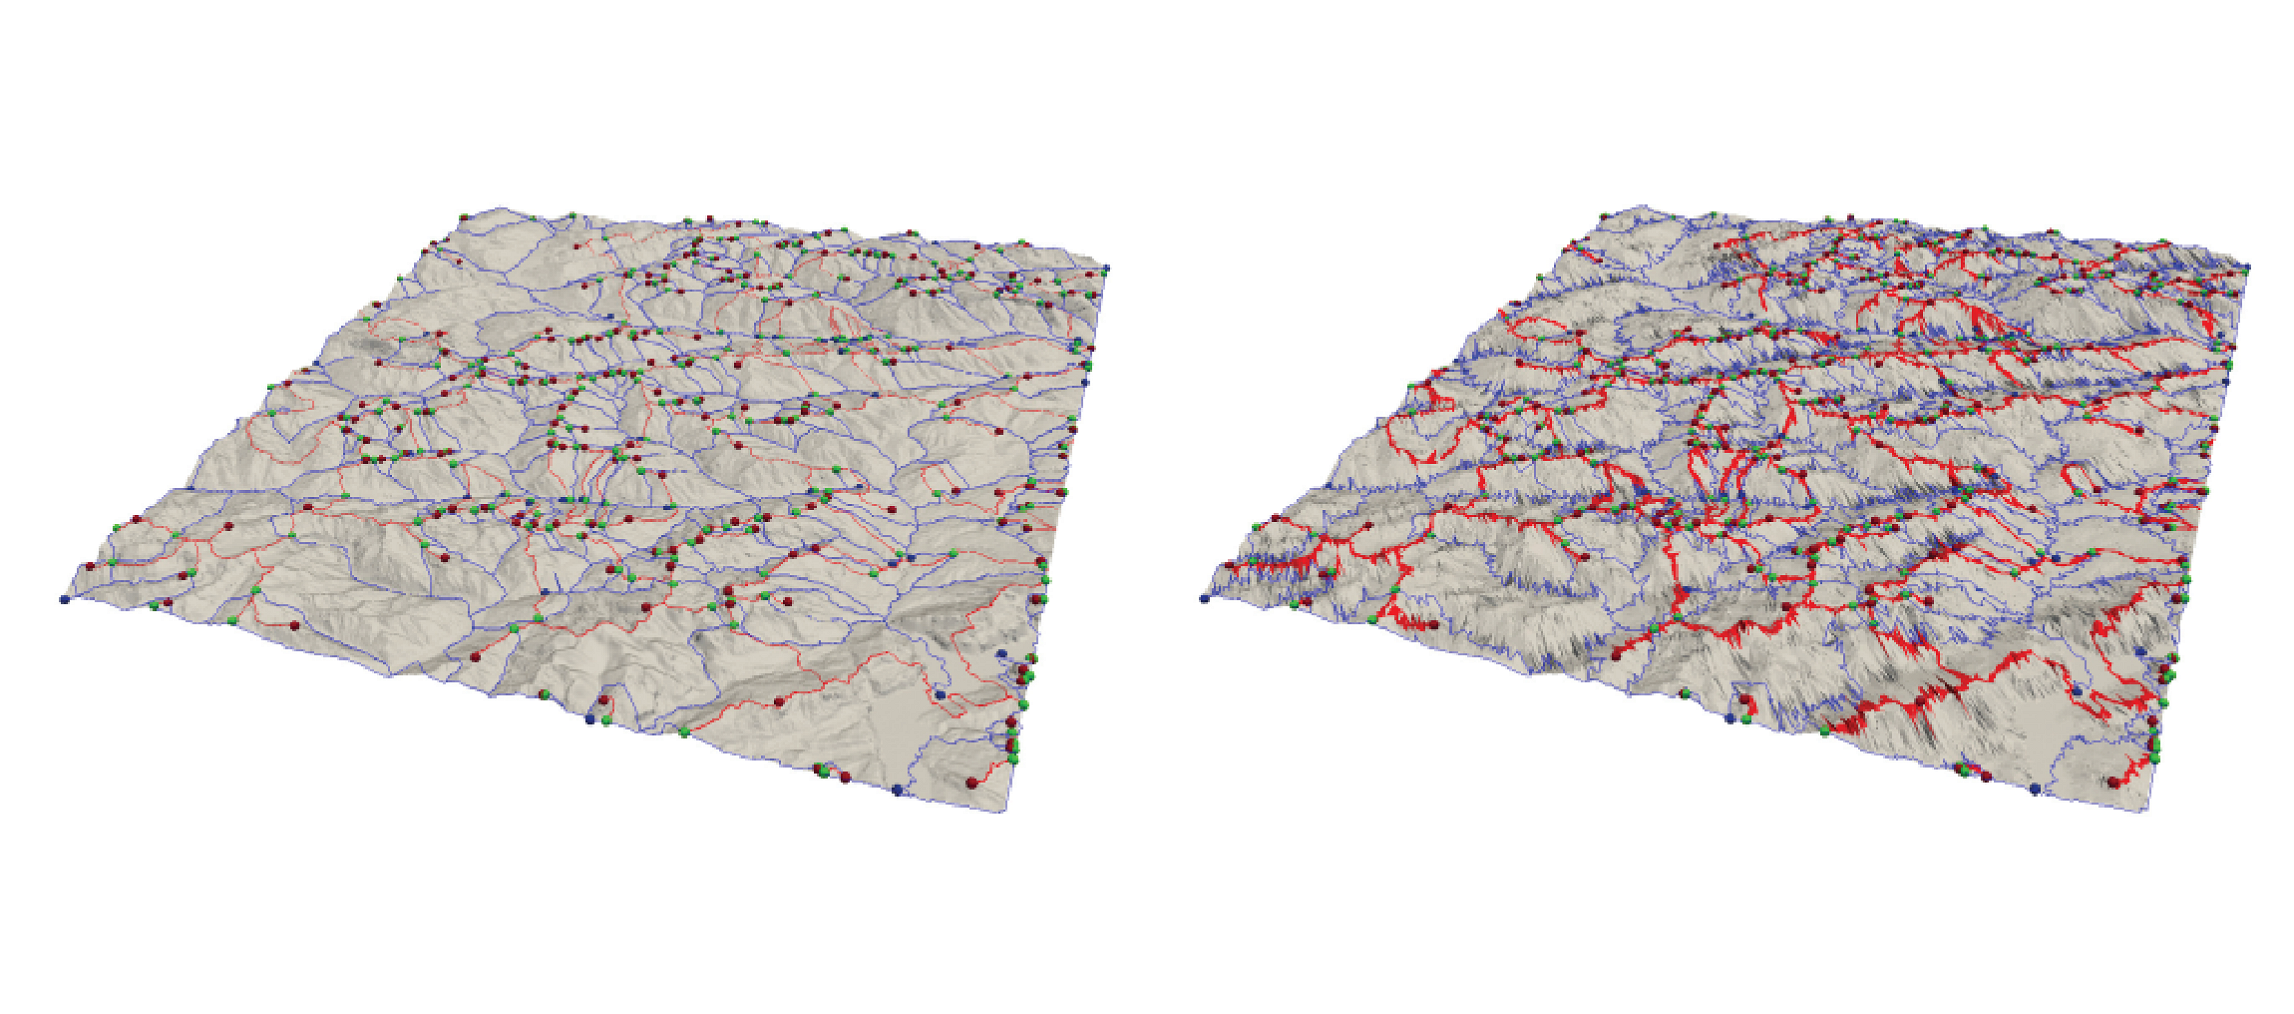 A Combined Geometrical and Topological Simplification Hierarchy for Terrain Analysis